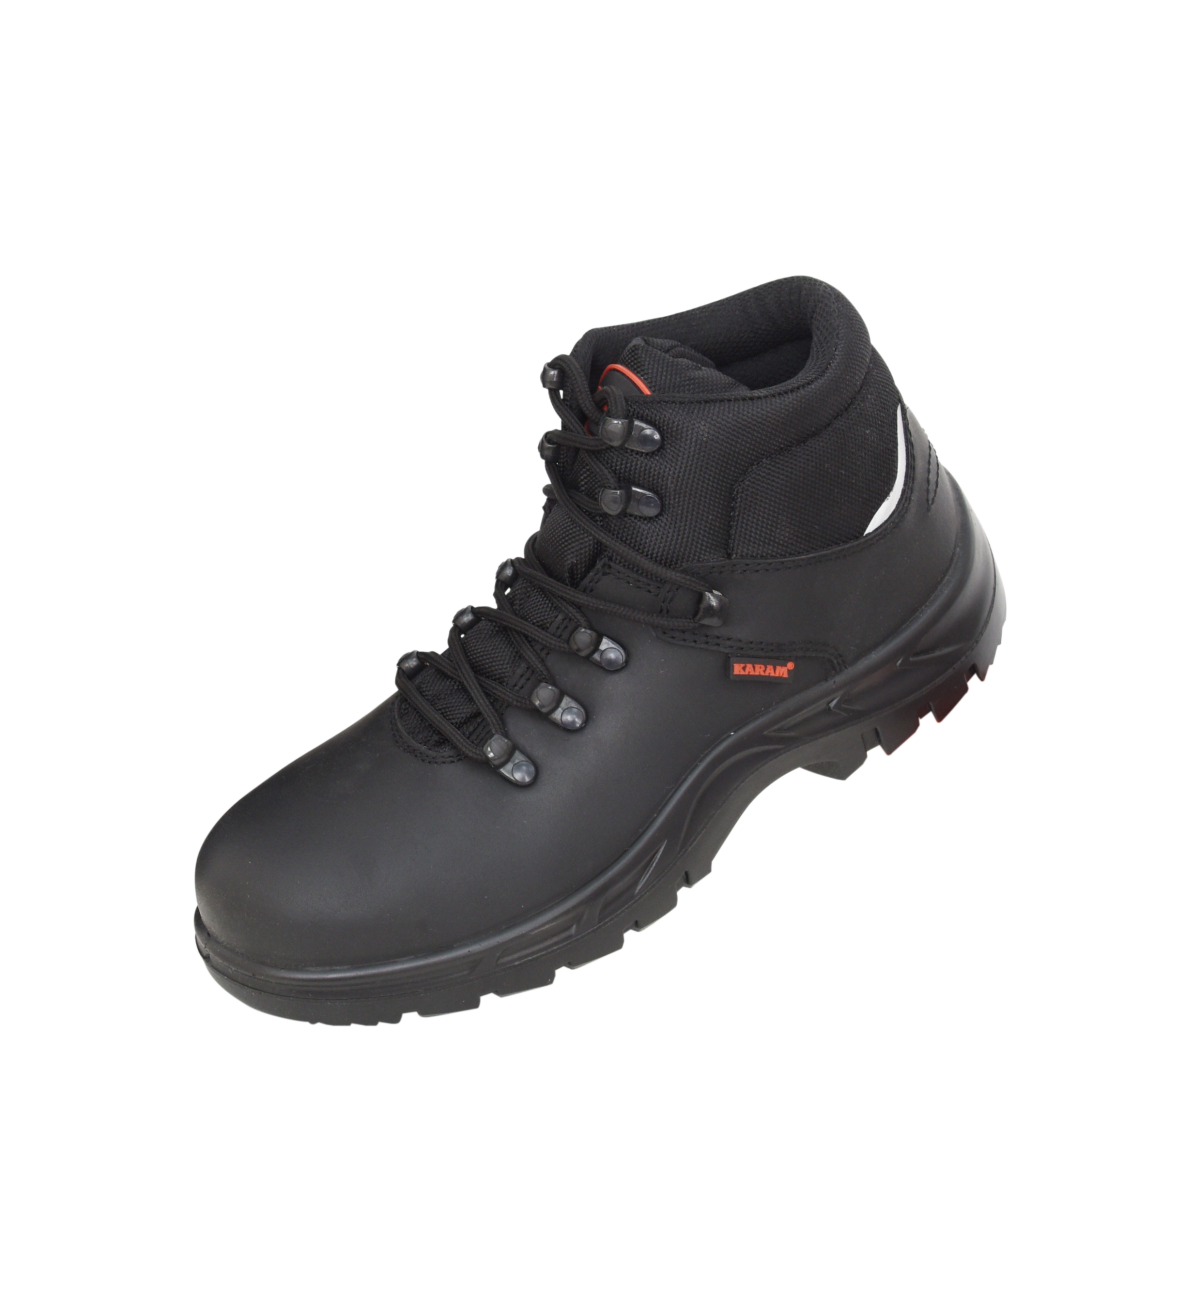 Details 163+ safety shoes sneakers super hot - kenmei.edu.vn